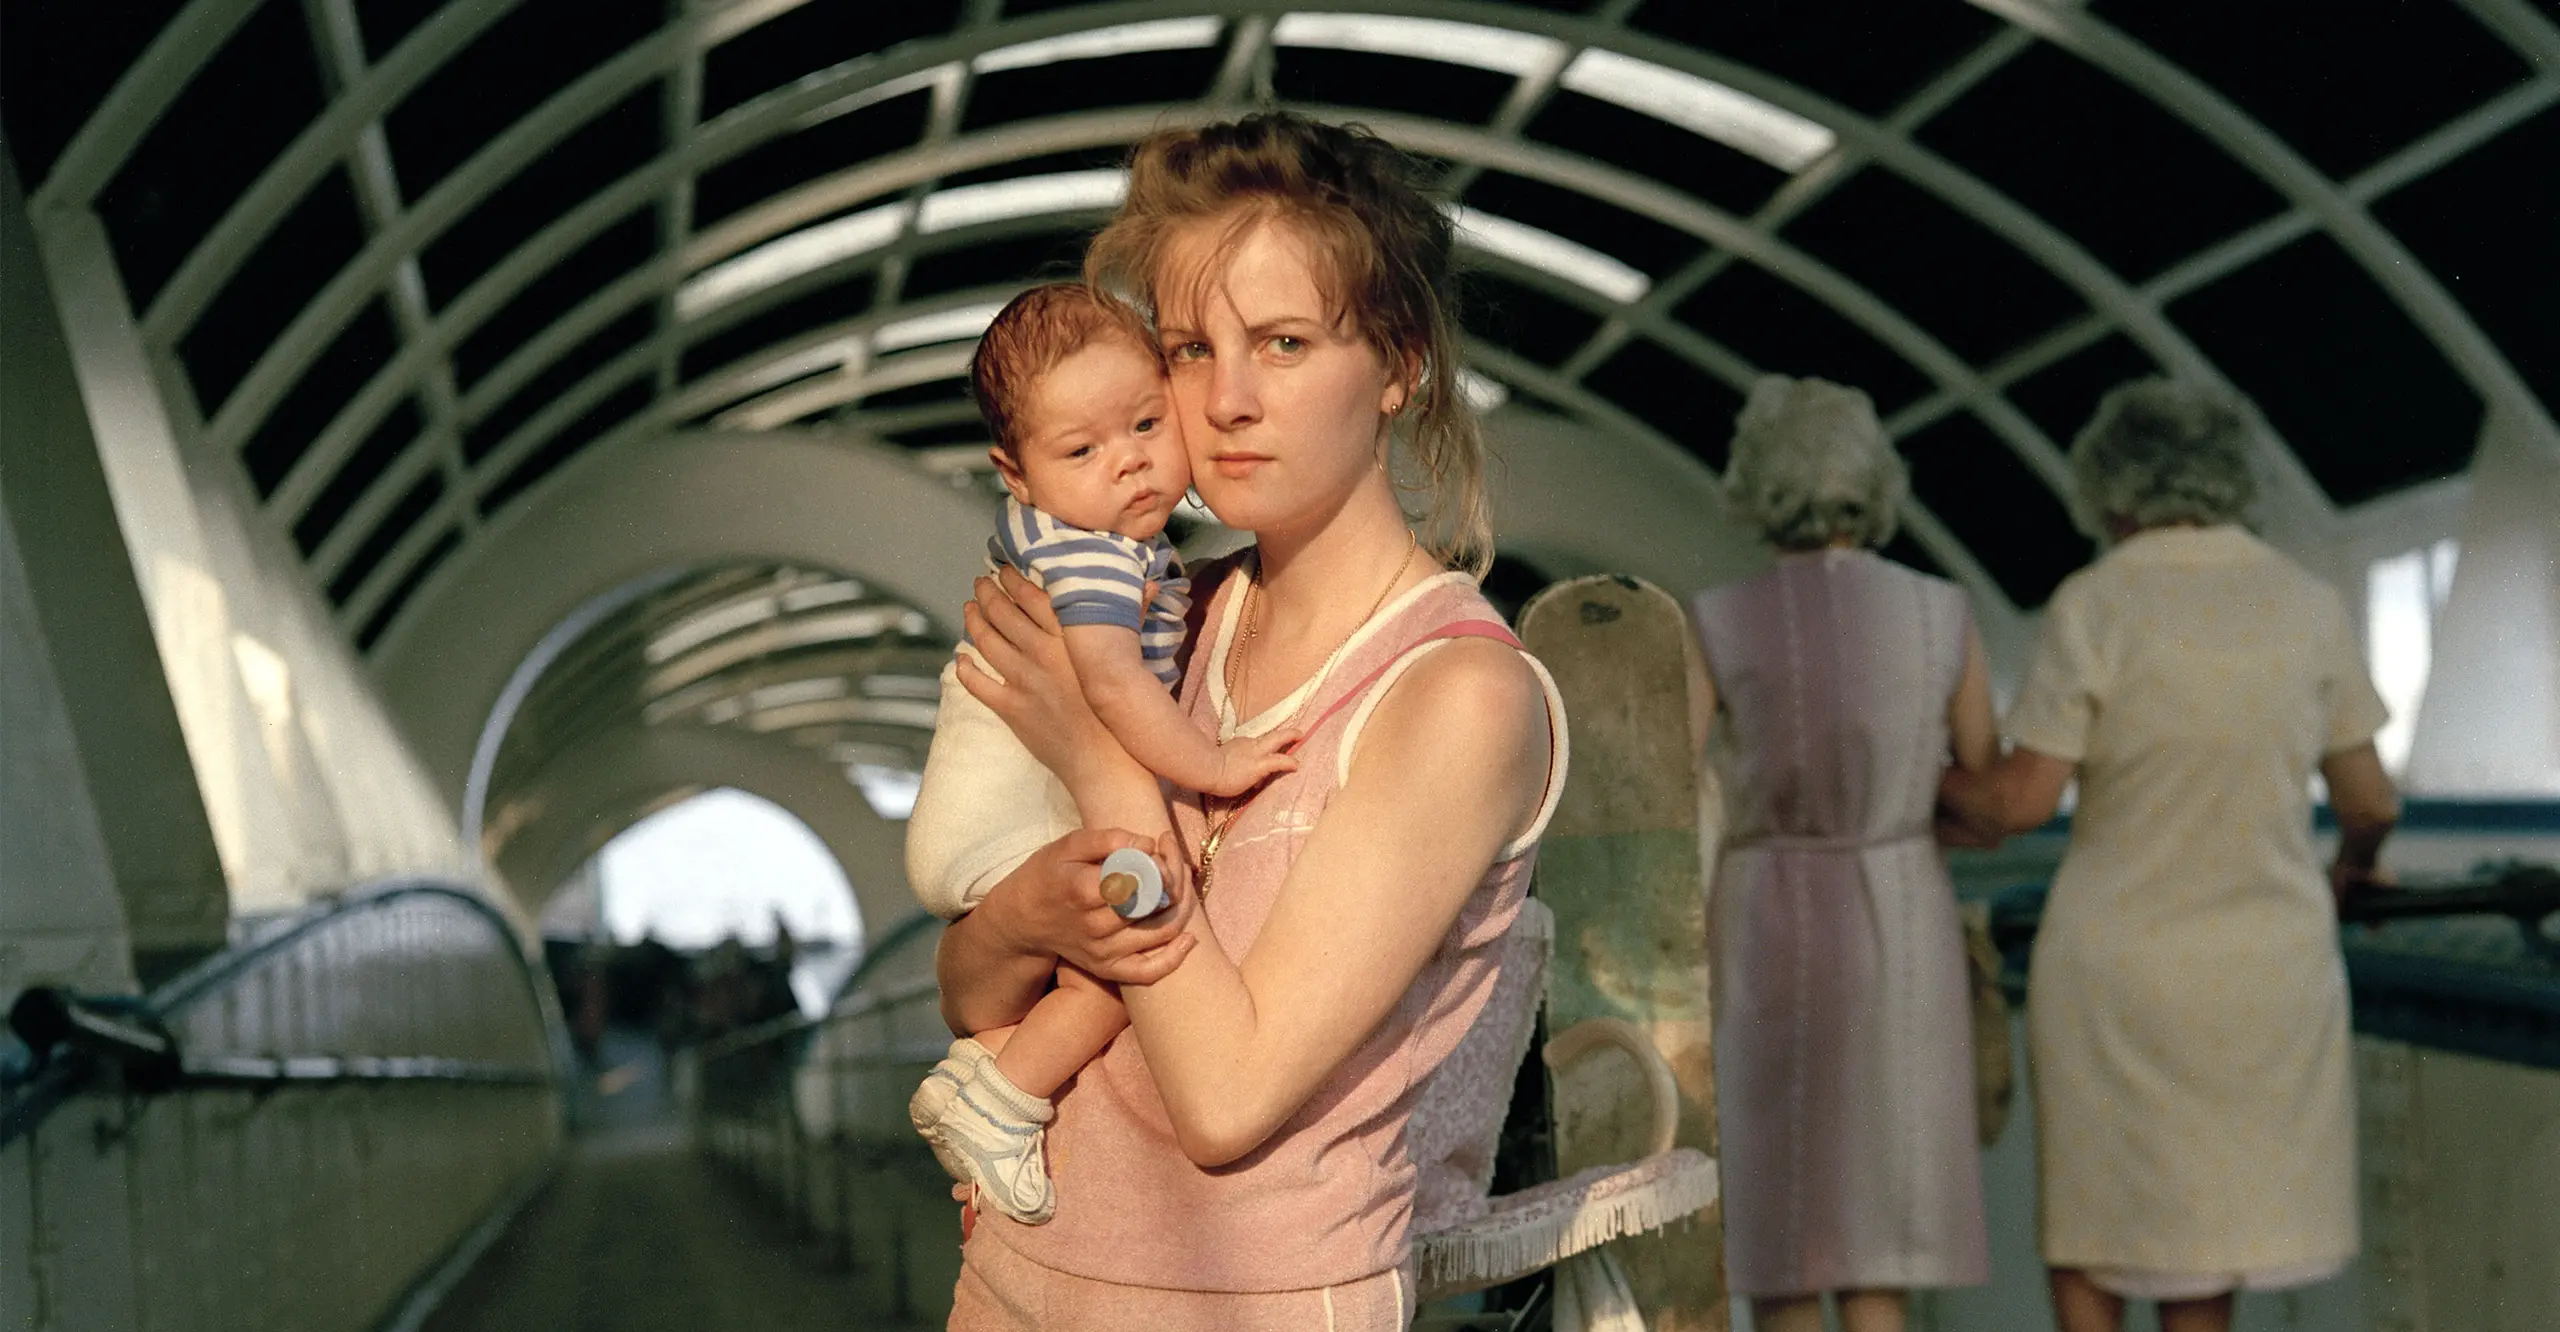 A young woman in a pink tracksuit looks directly at the camera, holding a baby